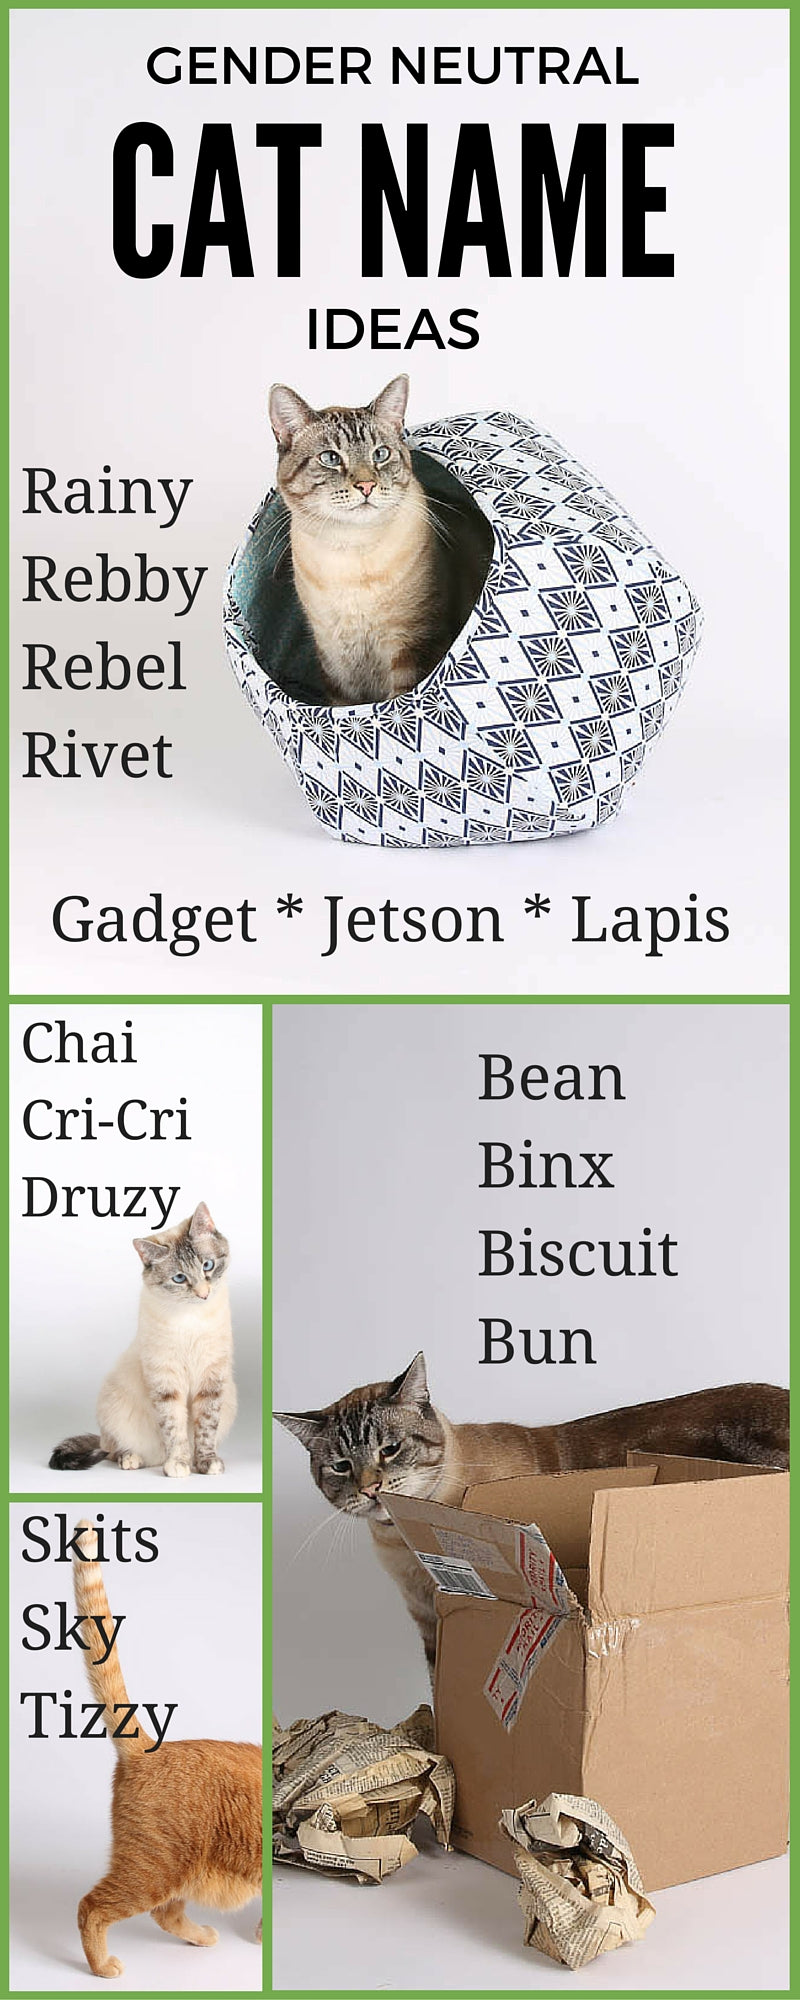 Cat Name Ideas That Are Gender Neutral The Cat Ball